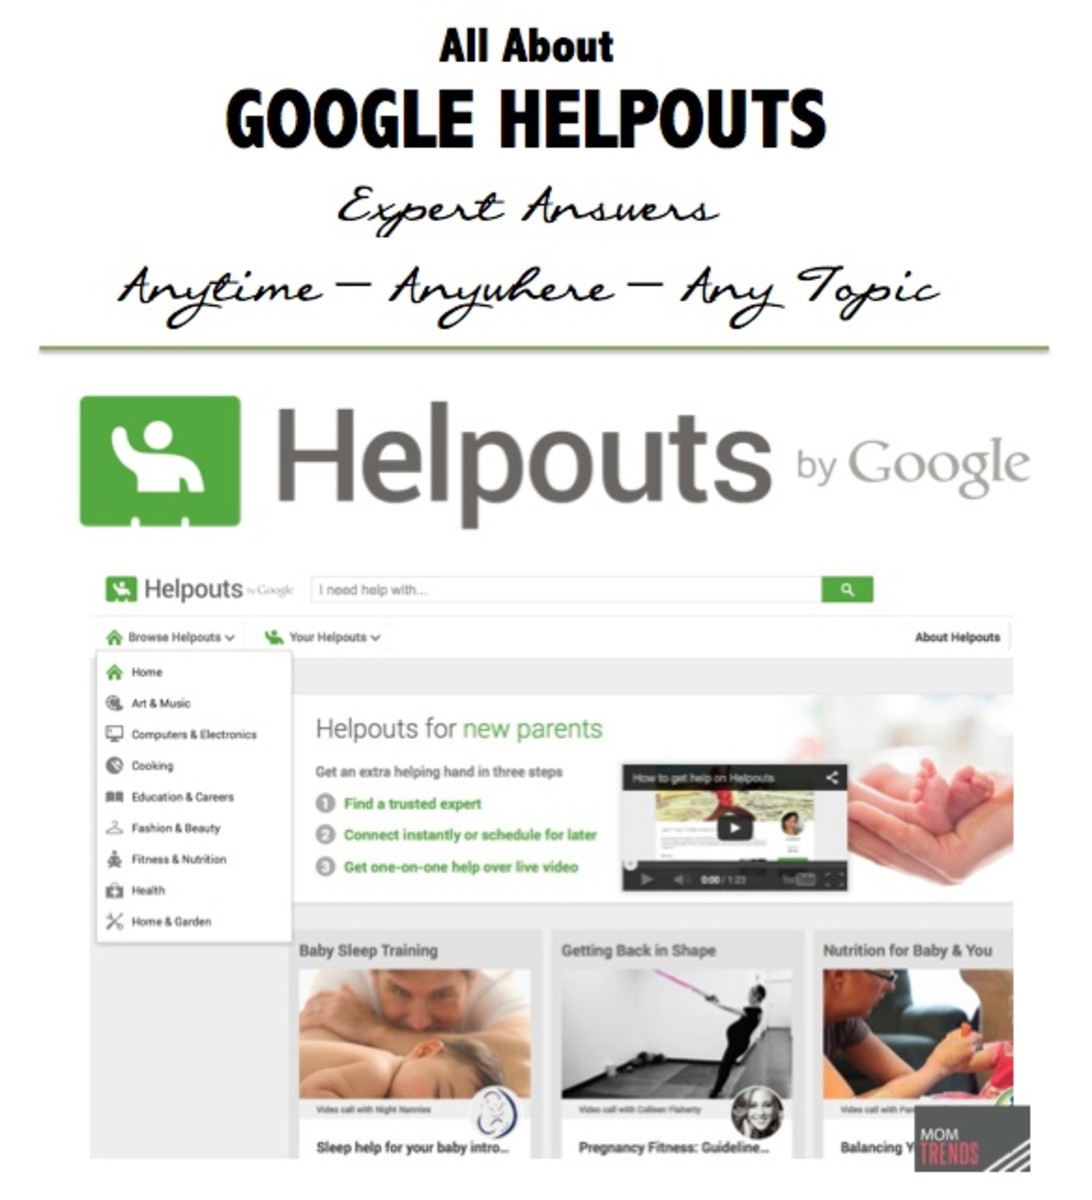 All About Google Helpouts